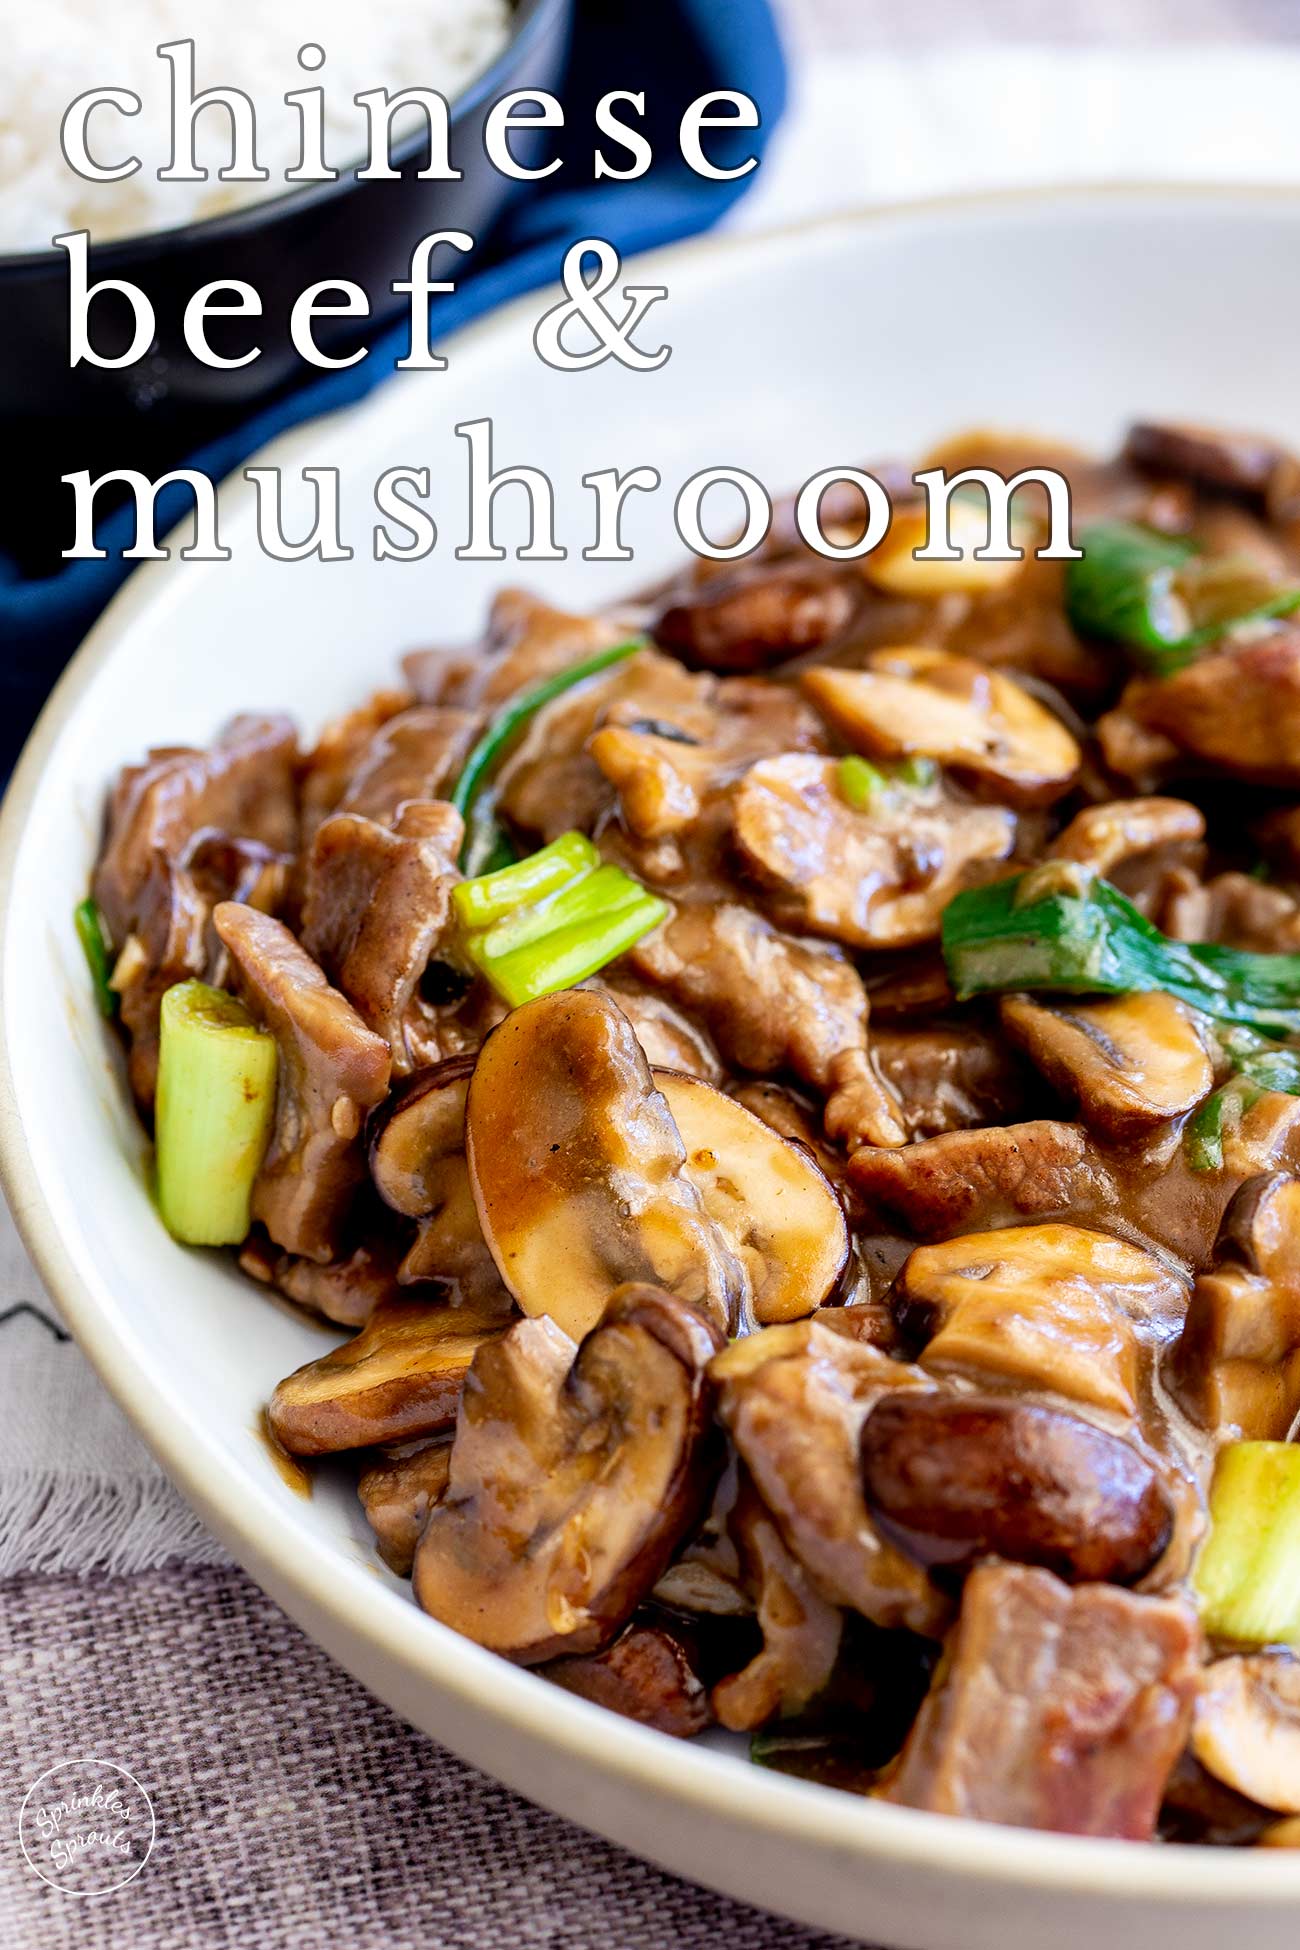 pin image: Chinese beef and mushroom in a dish with text overlaid